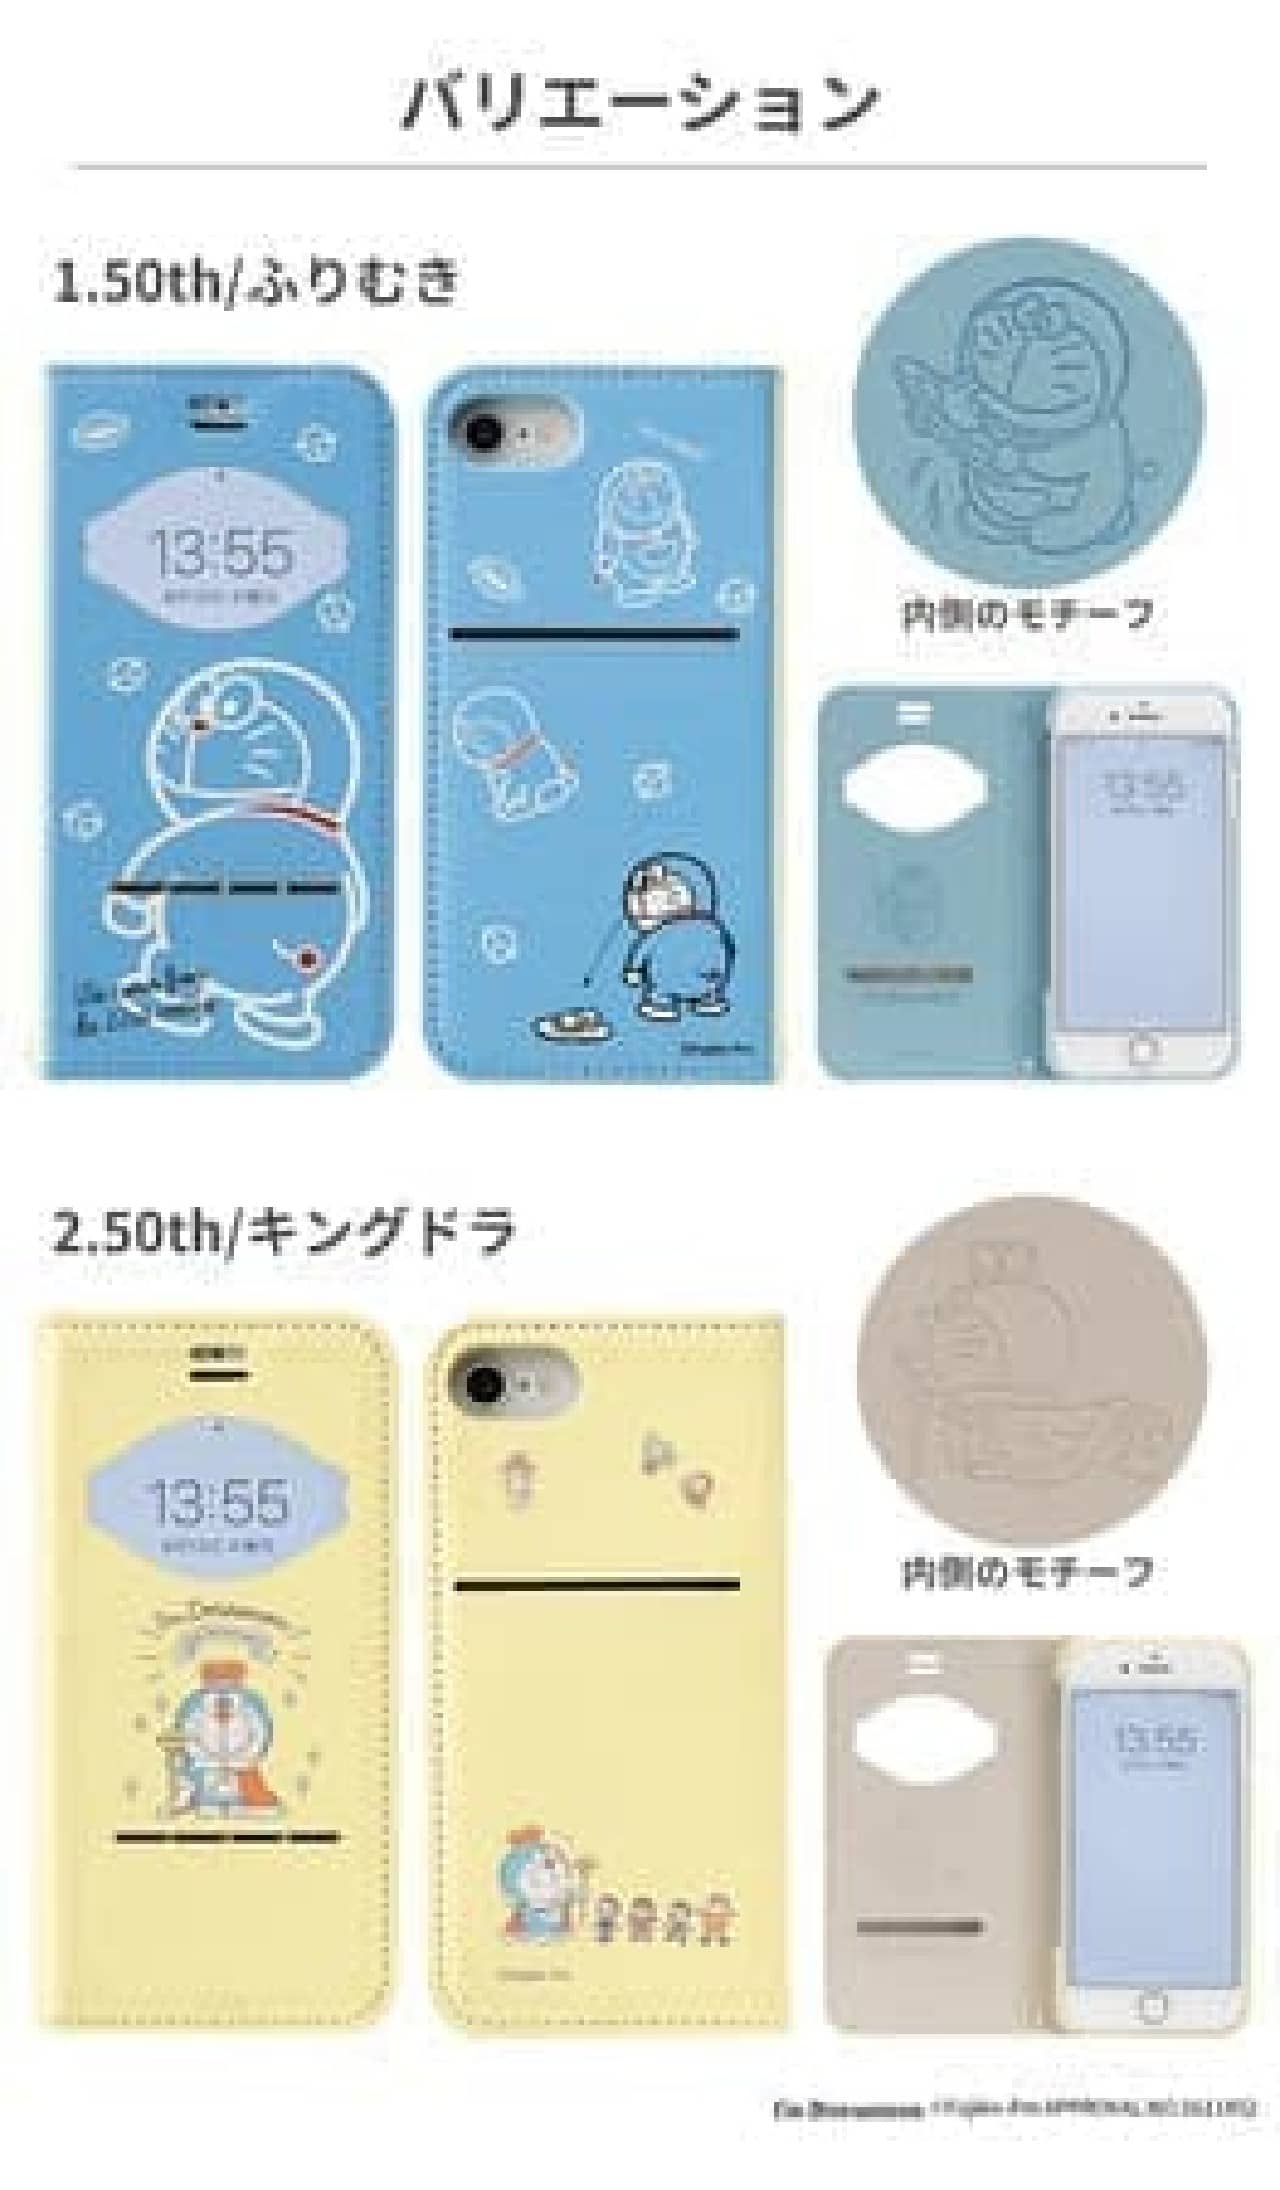 [For iPhone 8/7 / 6s / 6 / SE (2nd generation) only] I'm Doraemon / Diary case with flip window